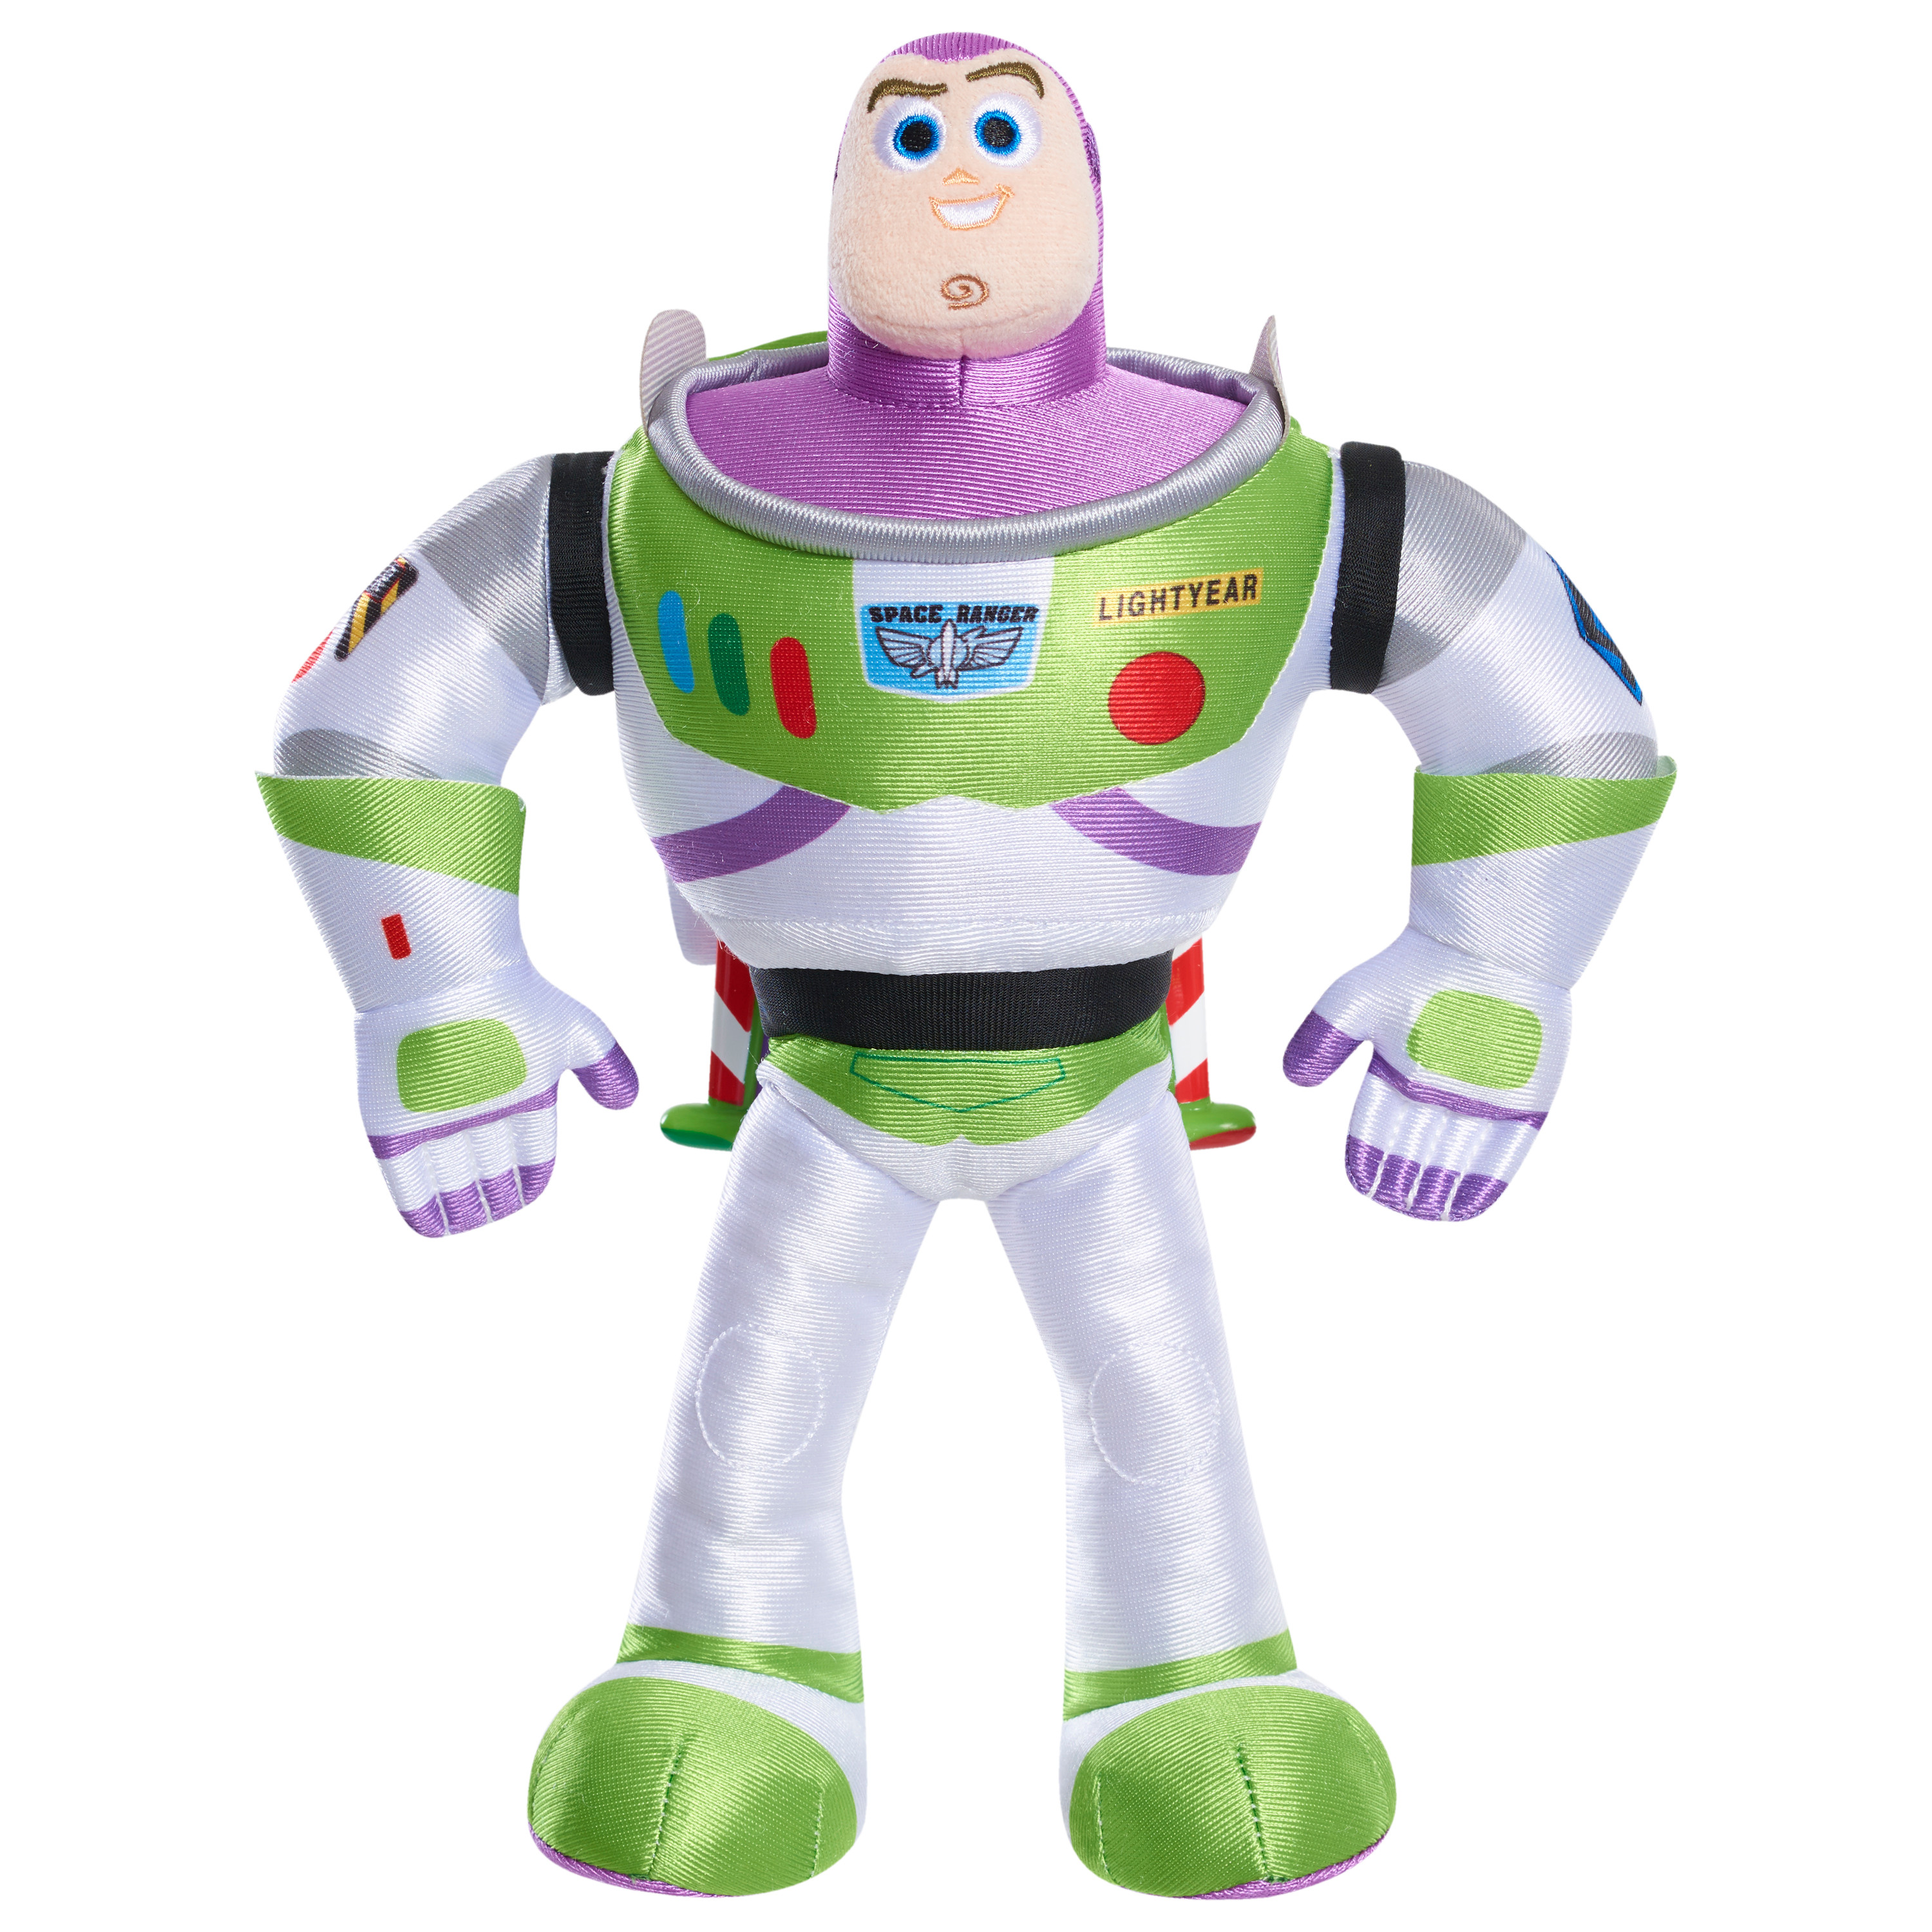 Disney•Pixar's Toy Story 4  High-Flying Buzz Lightyear Feature Plush, Officially Licensed Kids Toys for Ages 3 Up, Gifts and Presents - image 2 of 2